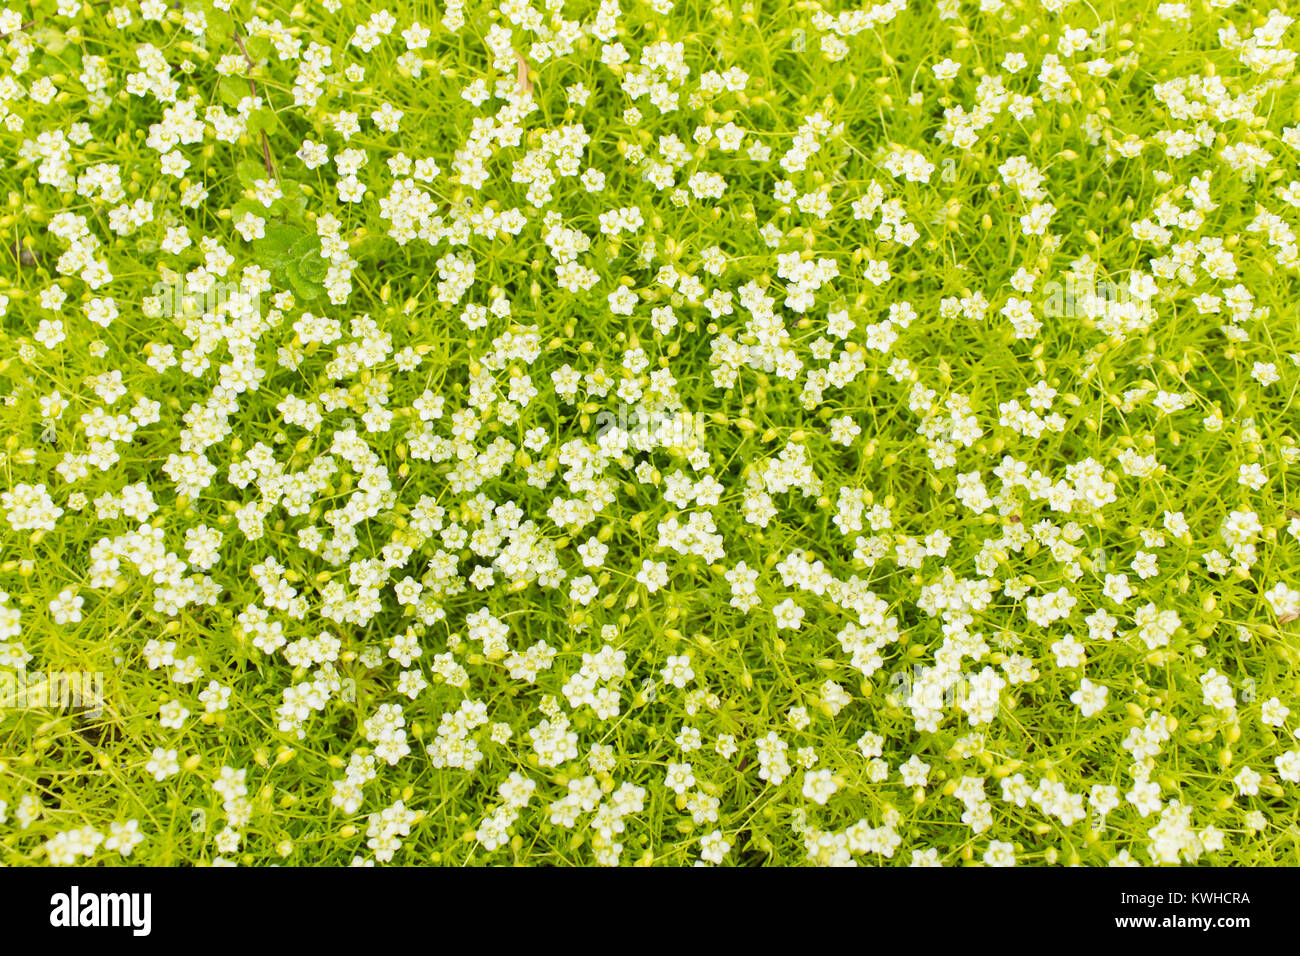 Bright colorful background of a ground cover plant with small white flowers. Sagina Stock Photo